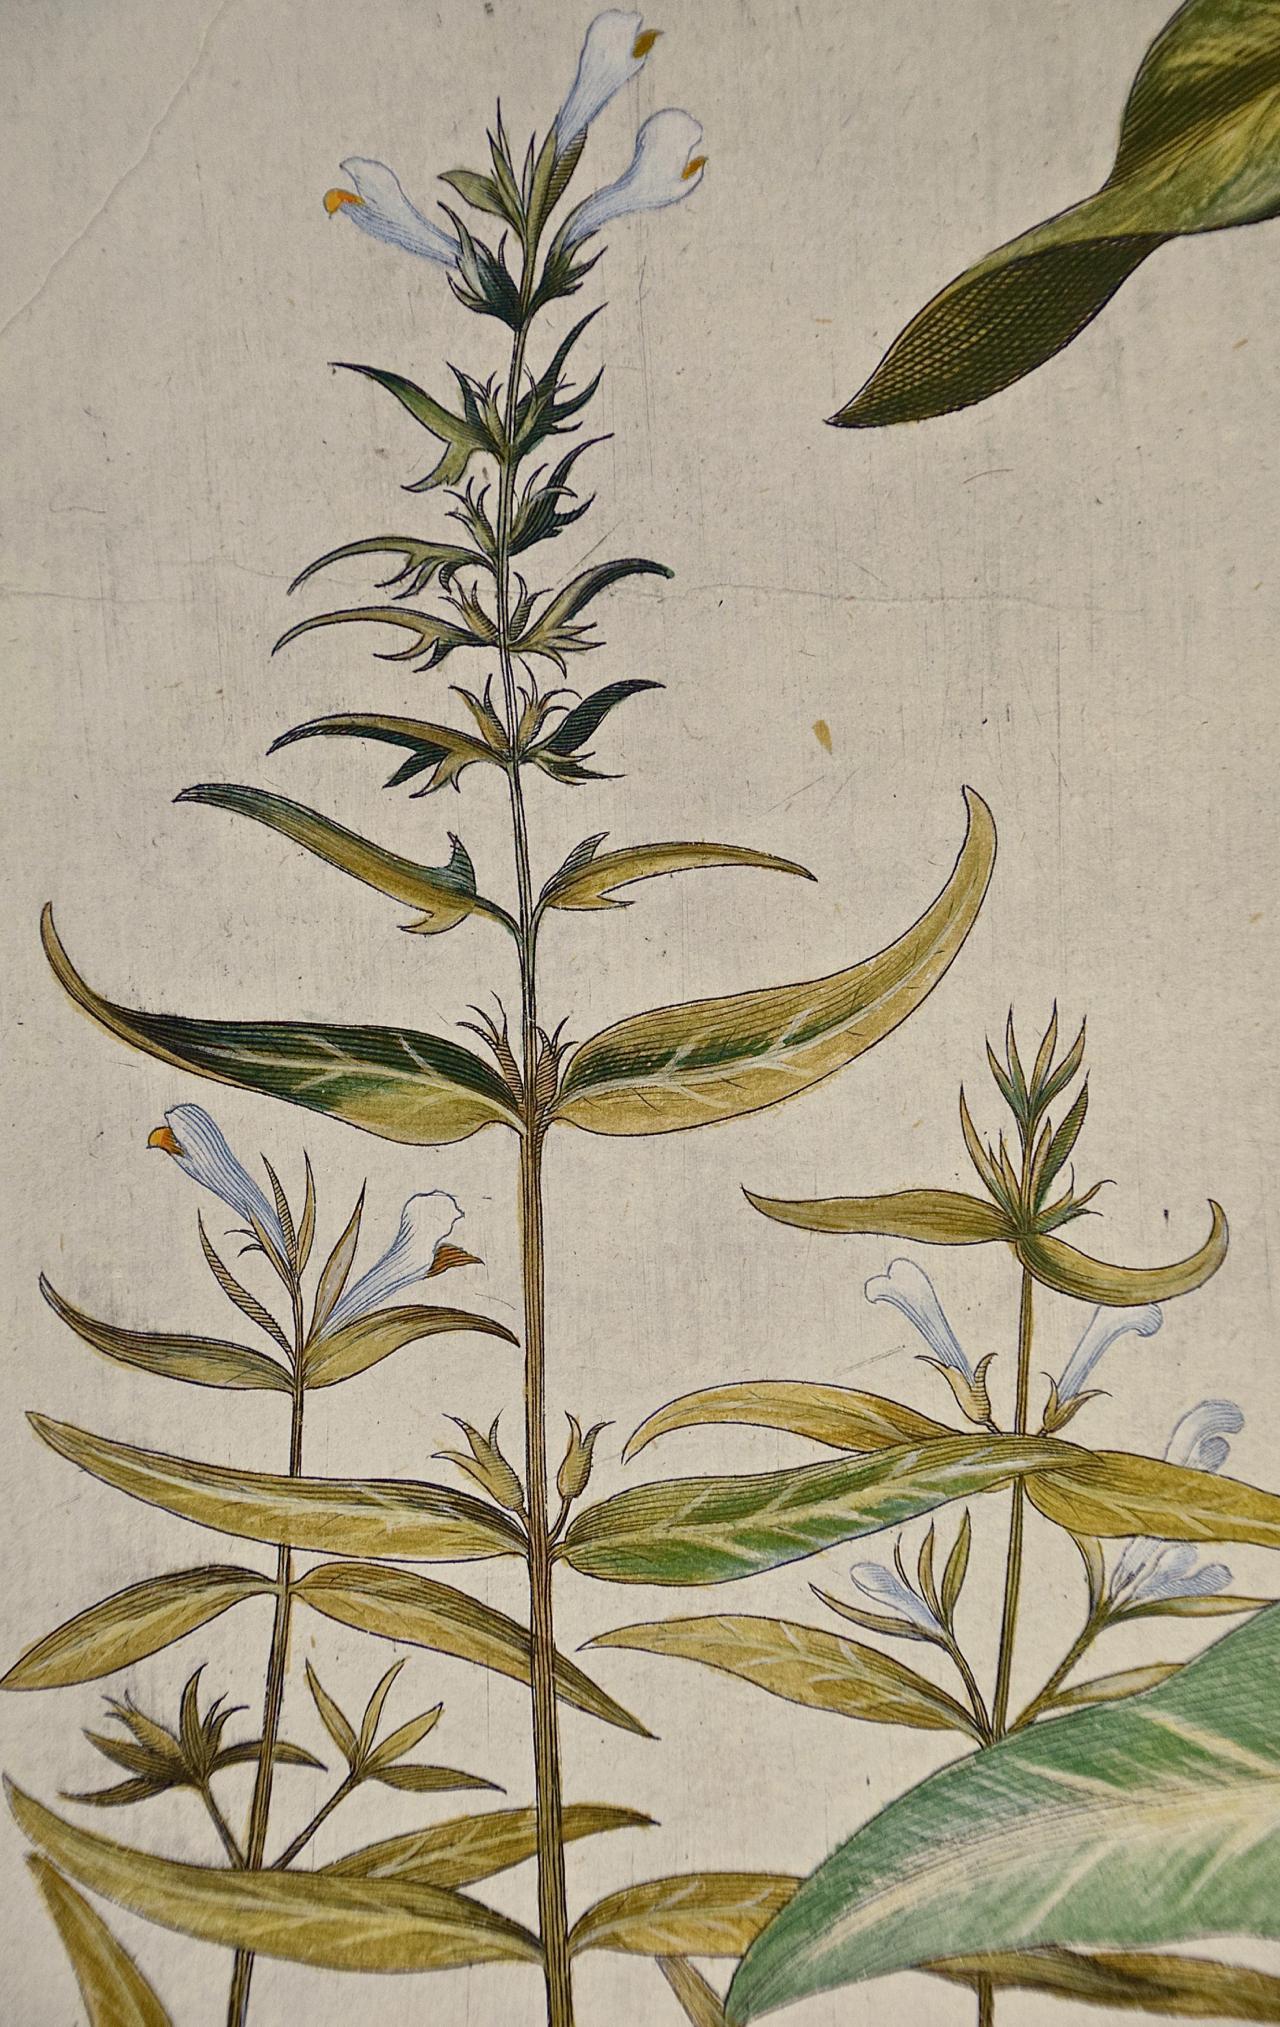 Flowering Lily Plants: A 17th C. Besler Hand-colored Botanical Engraving - Academic Print by Basilius Besler